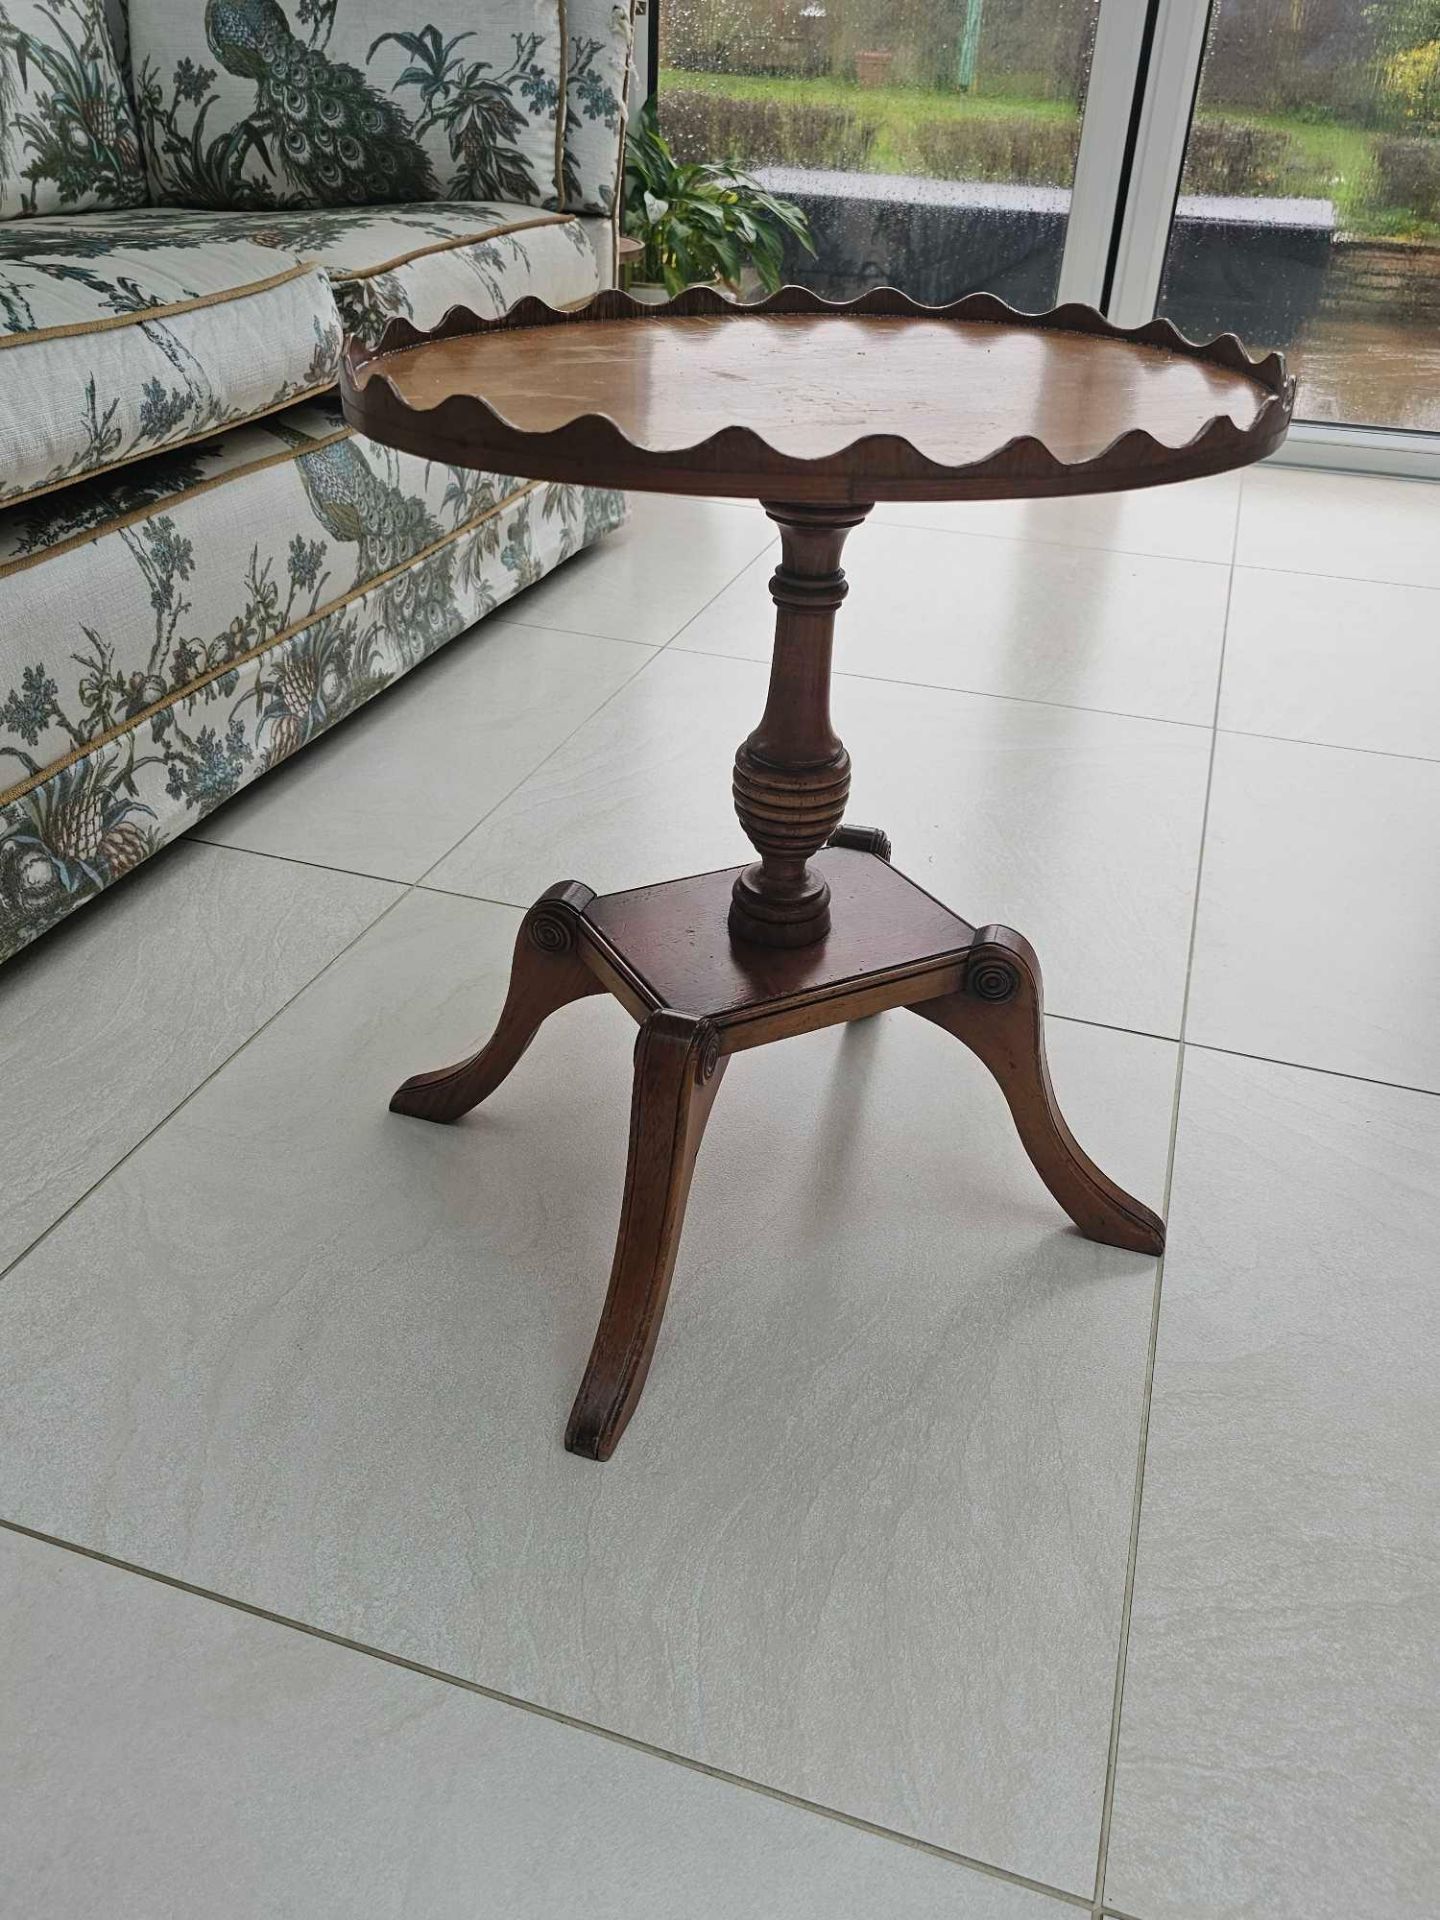 Bevan Funnell Reprodux Oval Mahogany Pedestal Wine Table In The Regency Style Having Shaped Wooden - Image 3 of 4